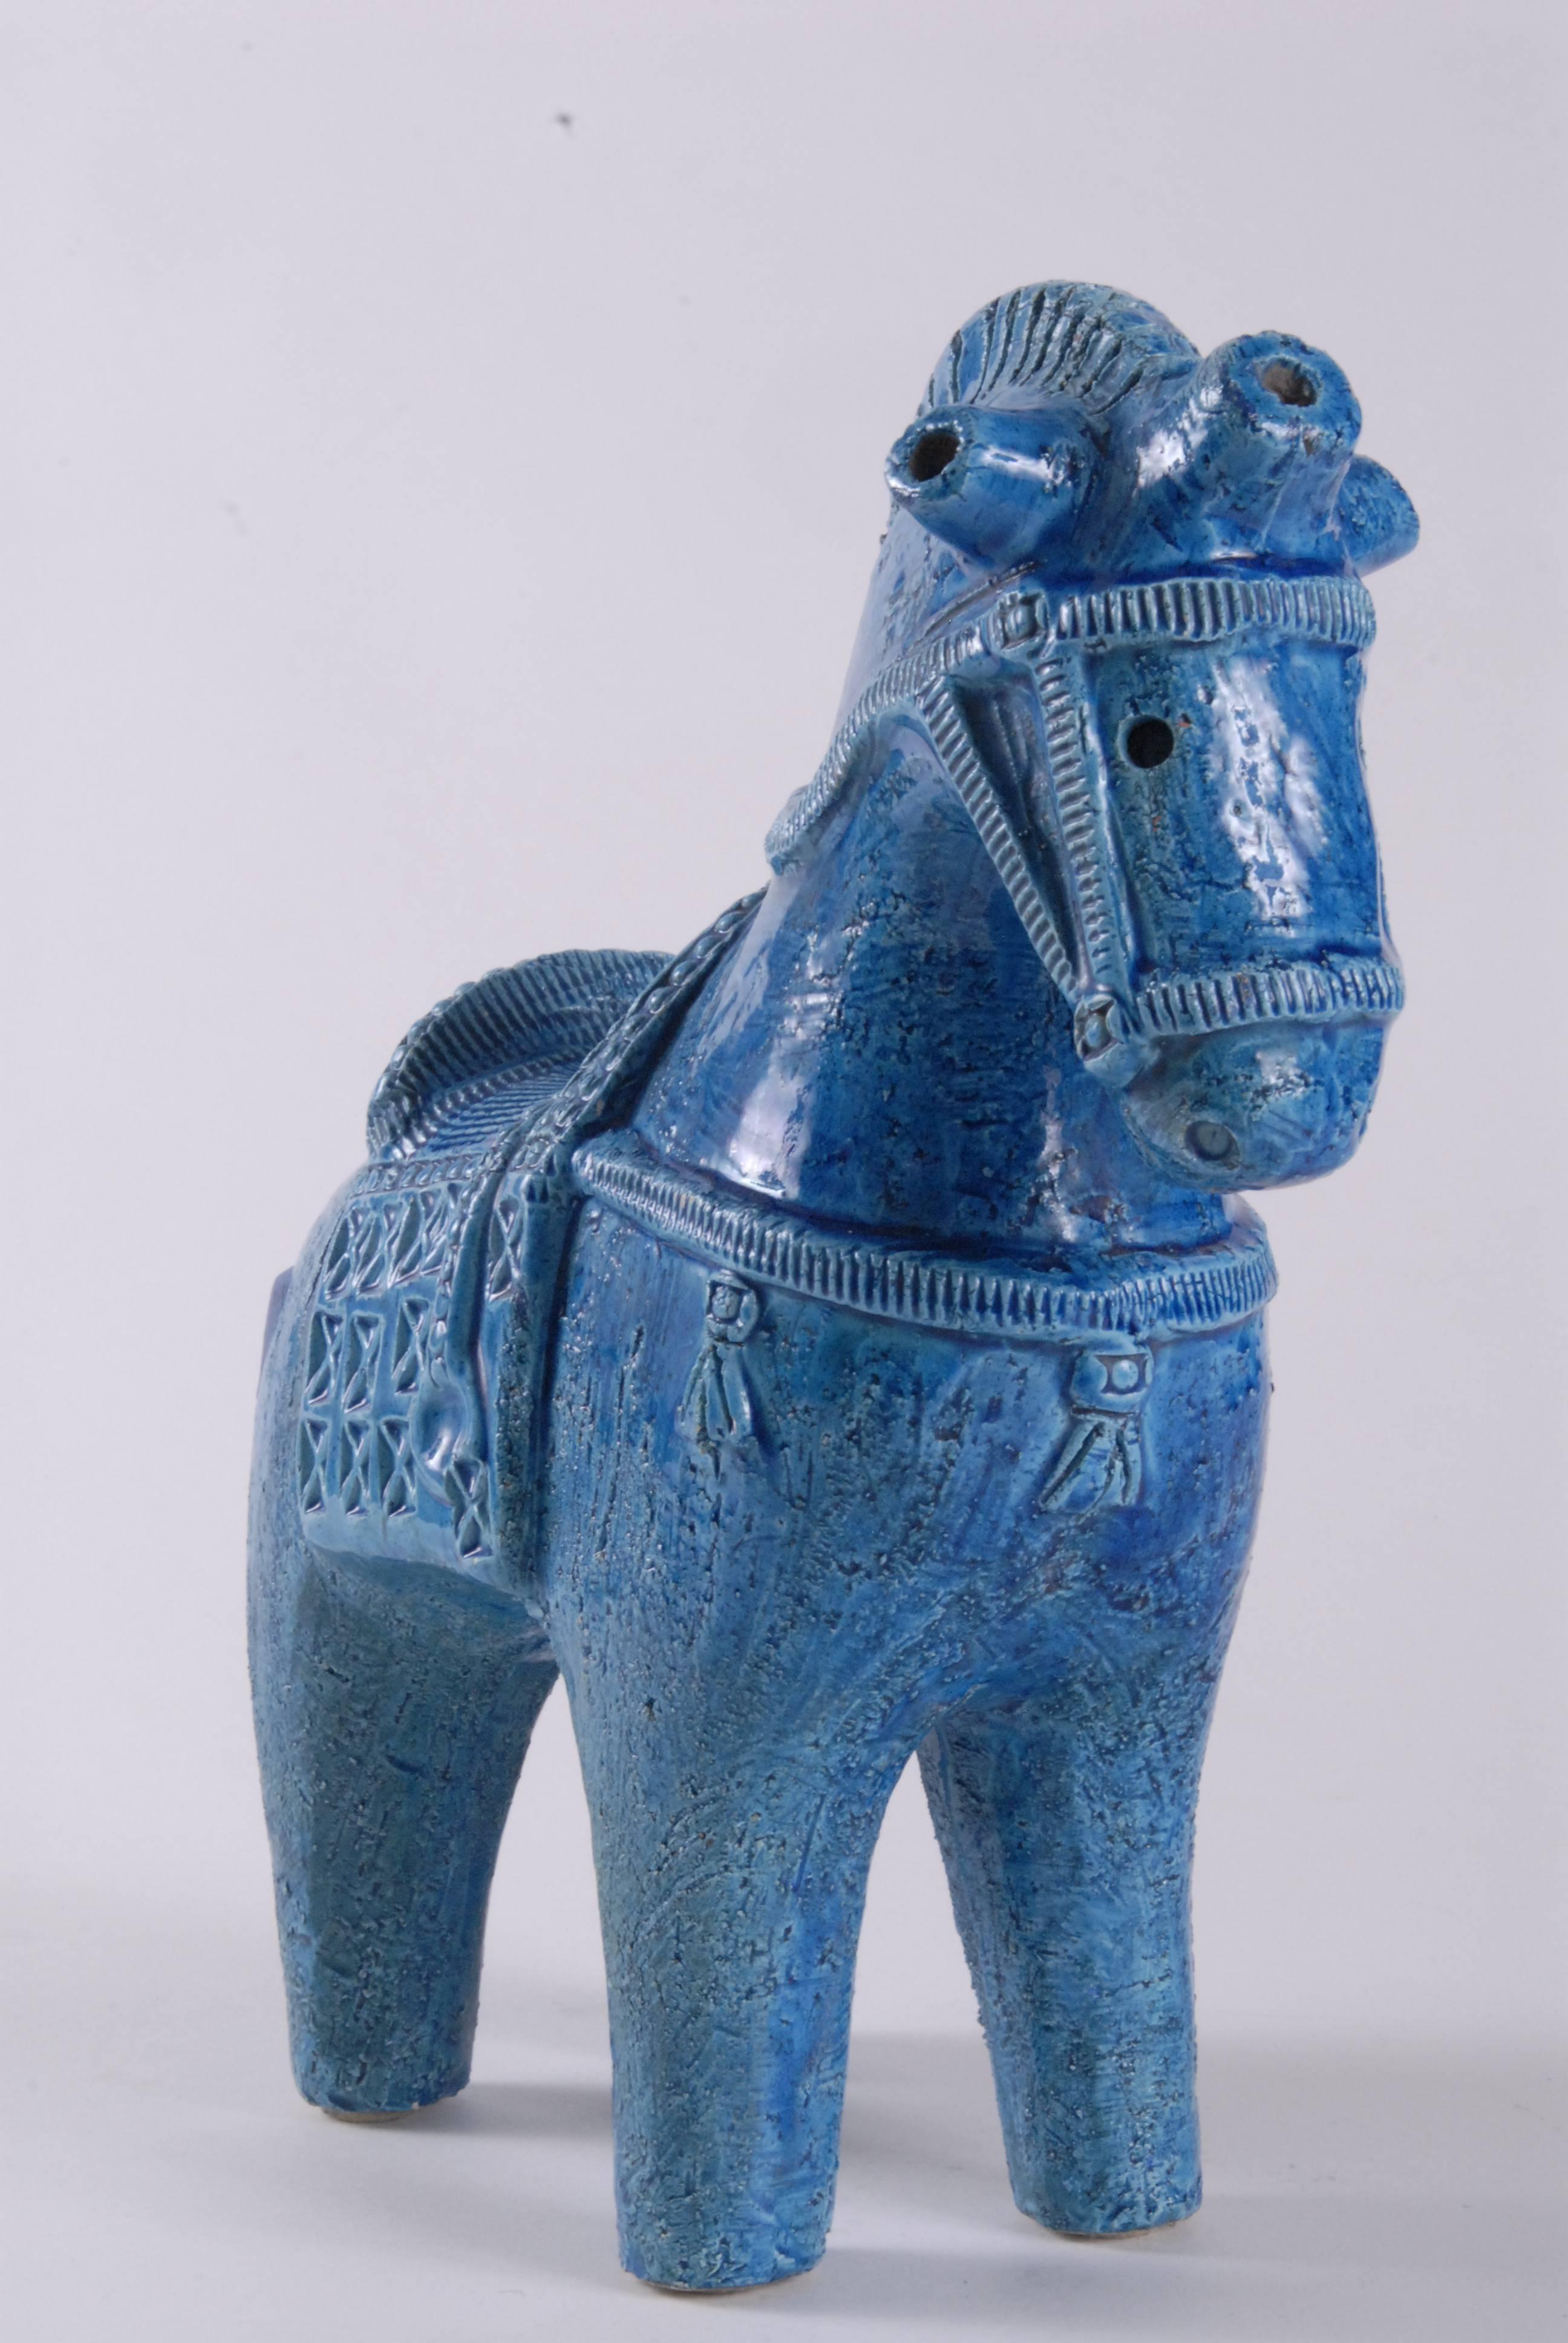 An Aldo Londi designed large horse with the 'Rimini' pattern coloured in a paler blue than usual.